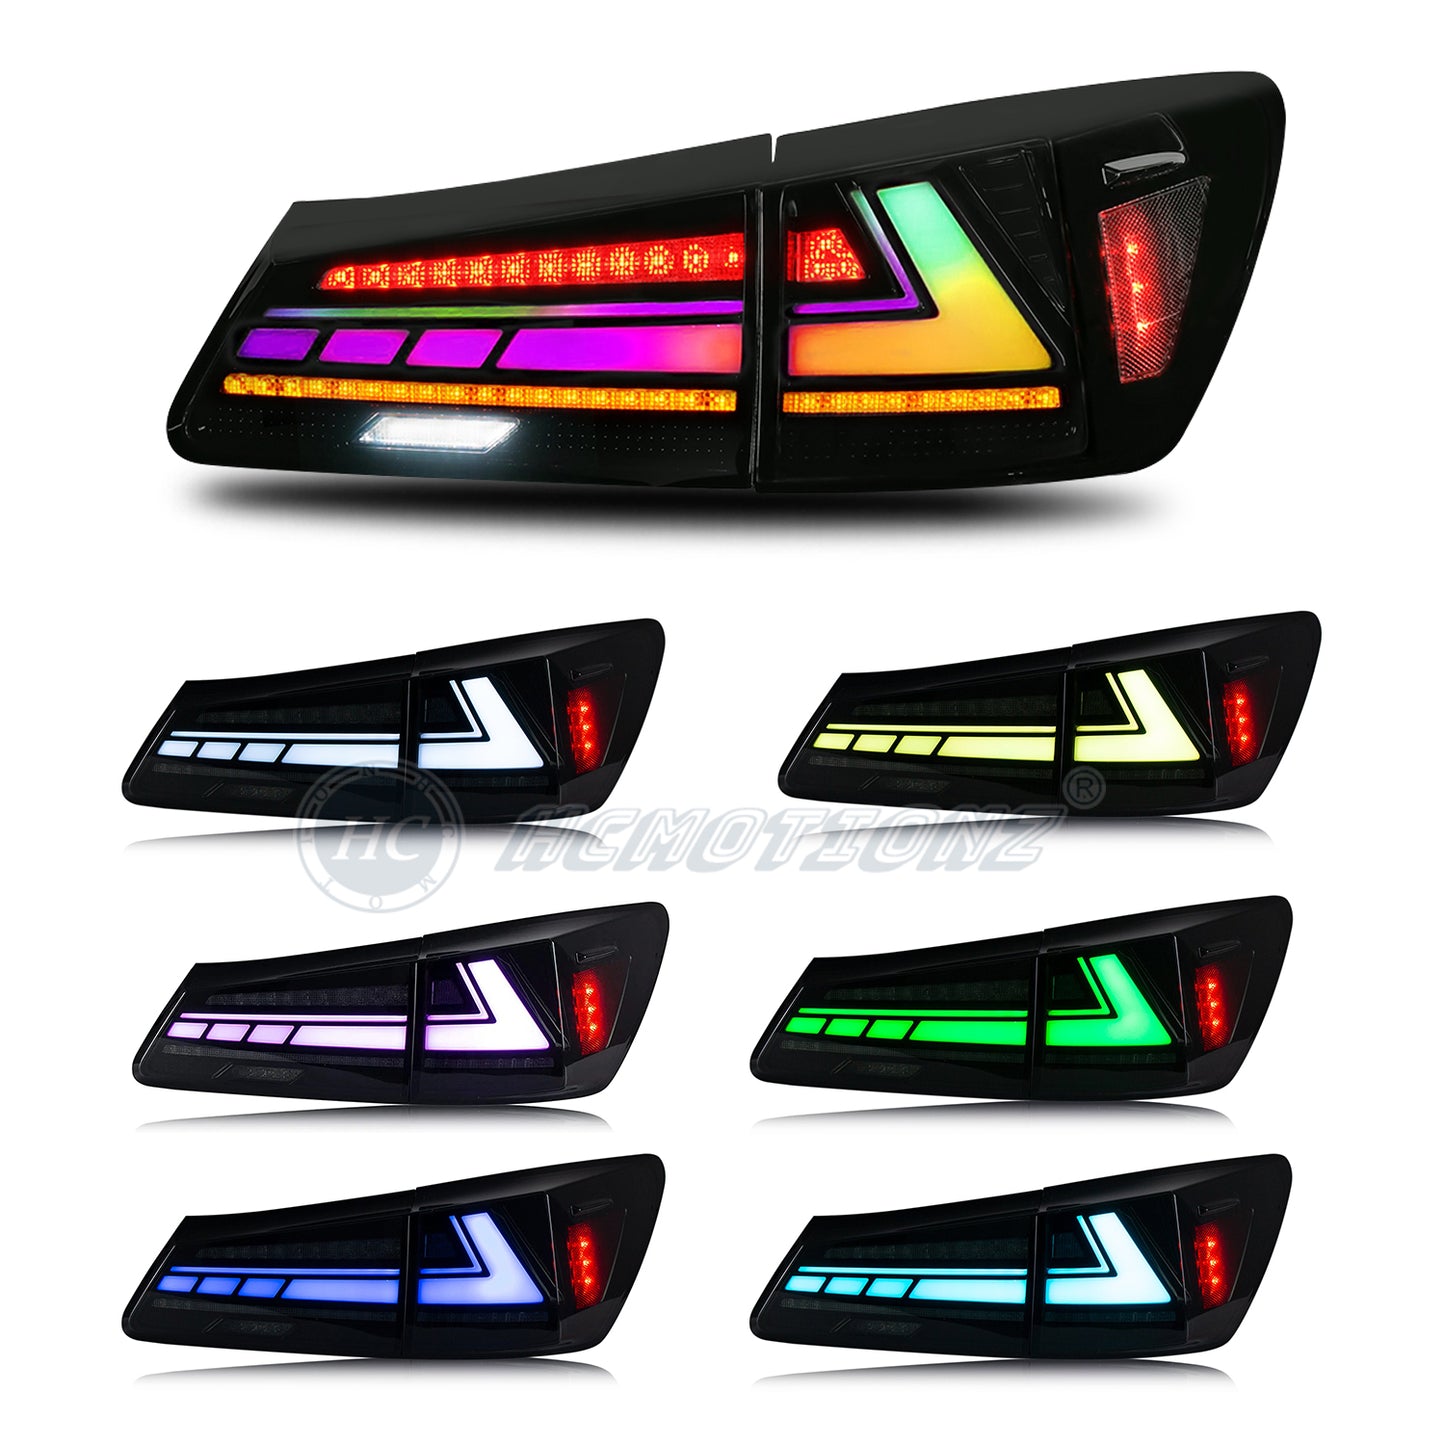 HCMOTION LED RGB Tail Light For Lexus IS250 IS350 ISF 2006-2012 Limited Time Offer